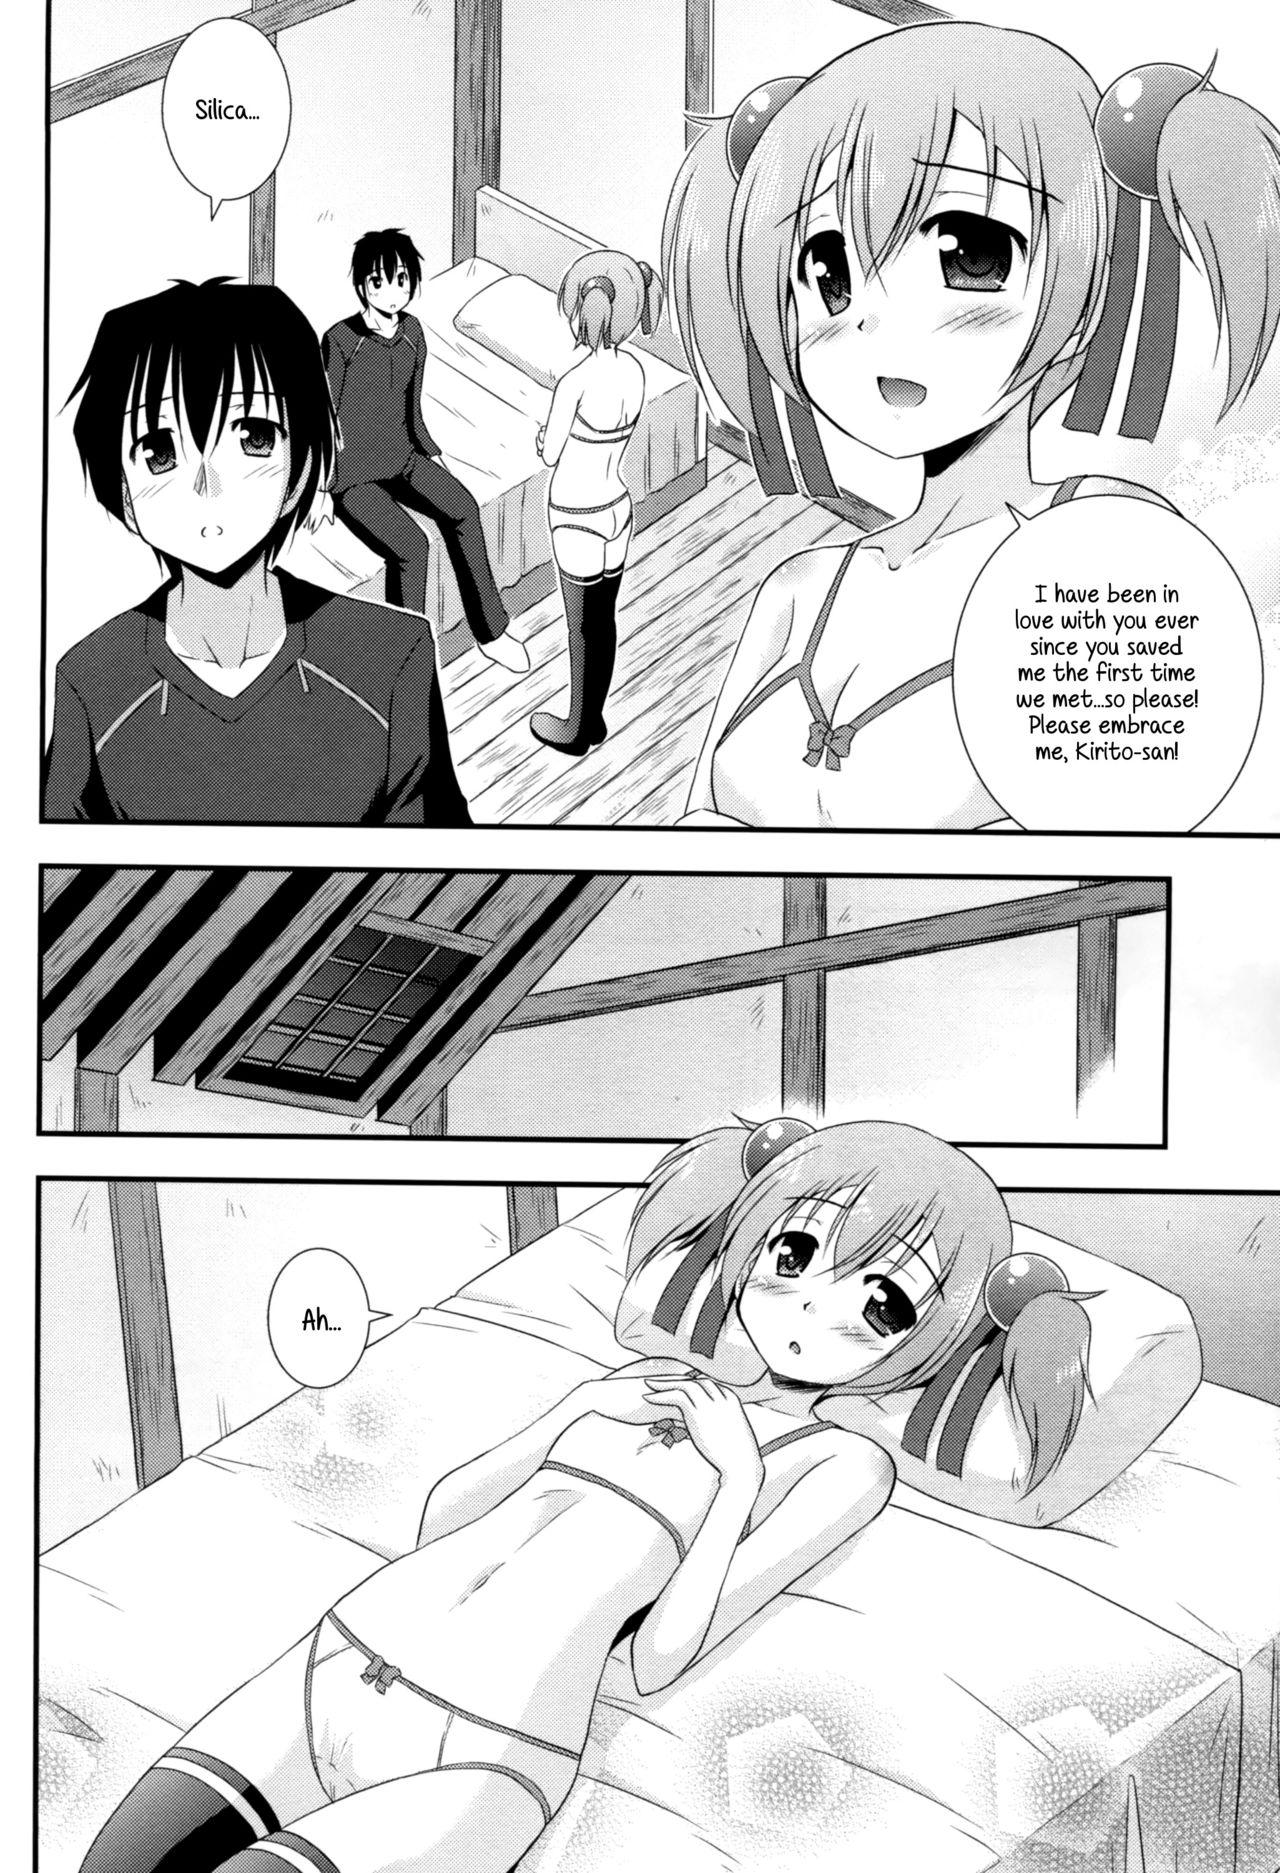 Silica Route Online 13